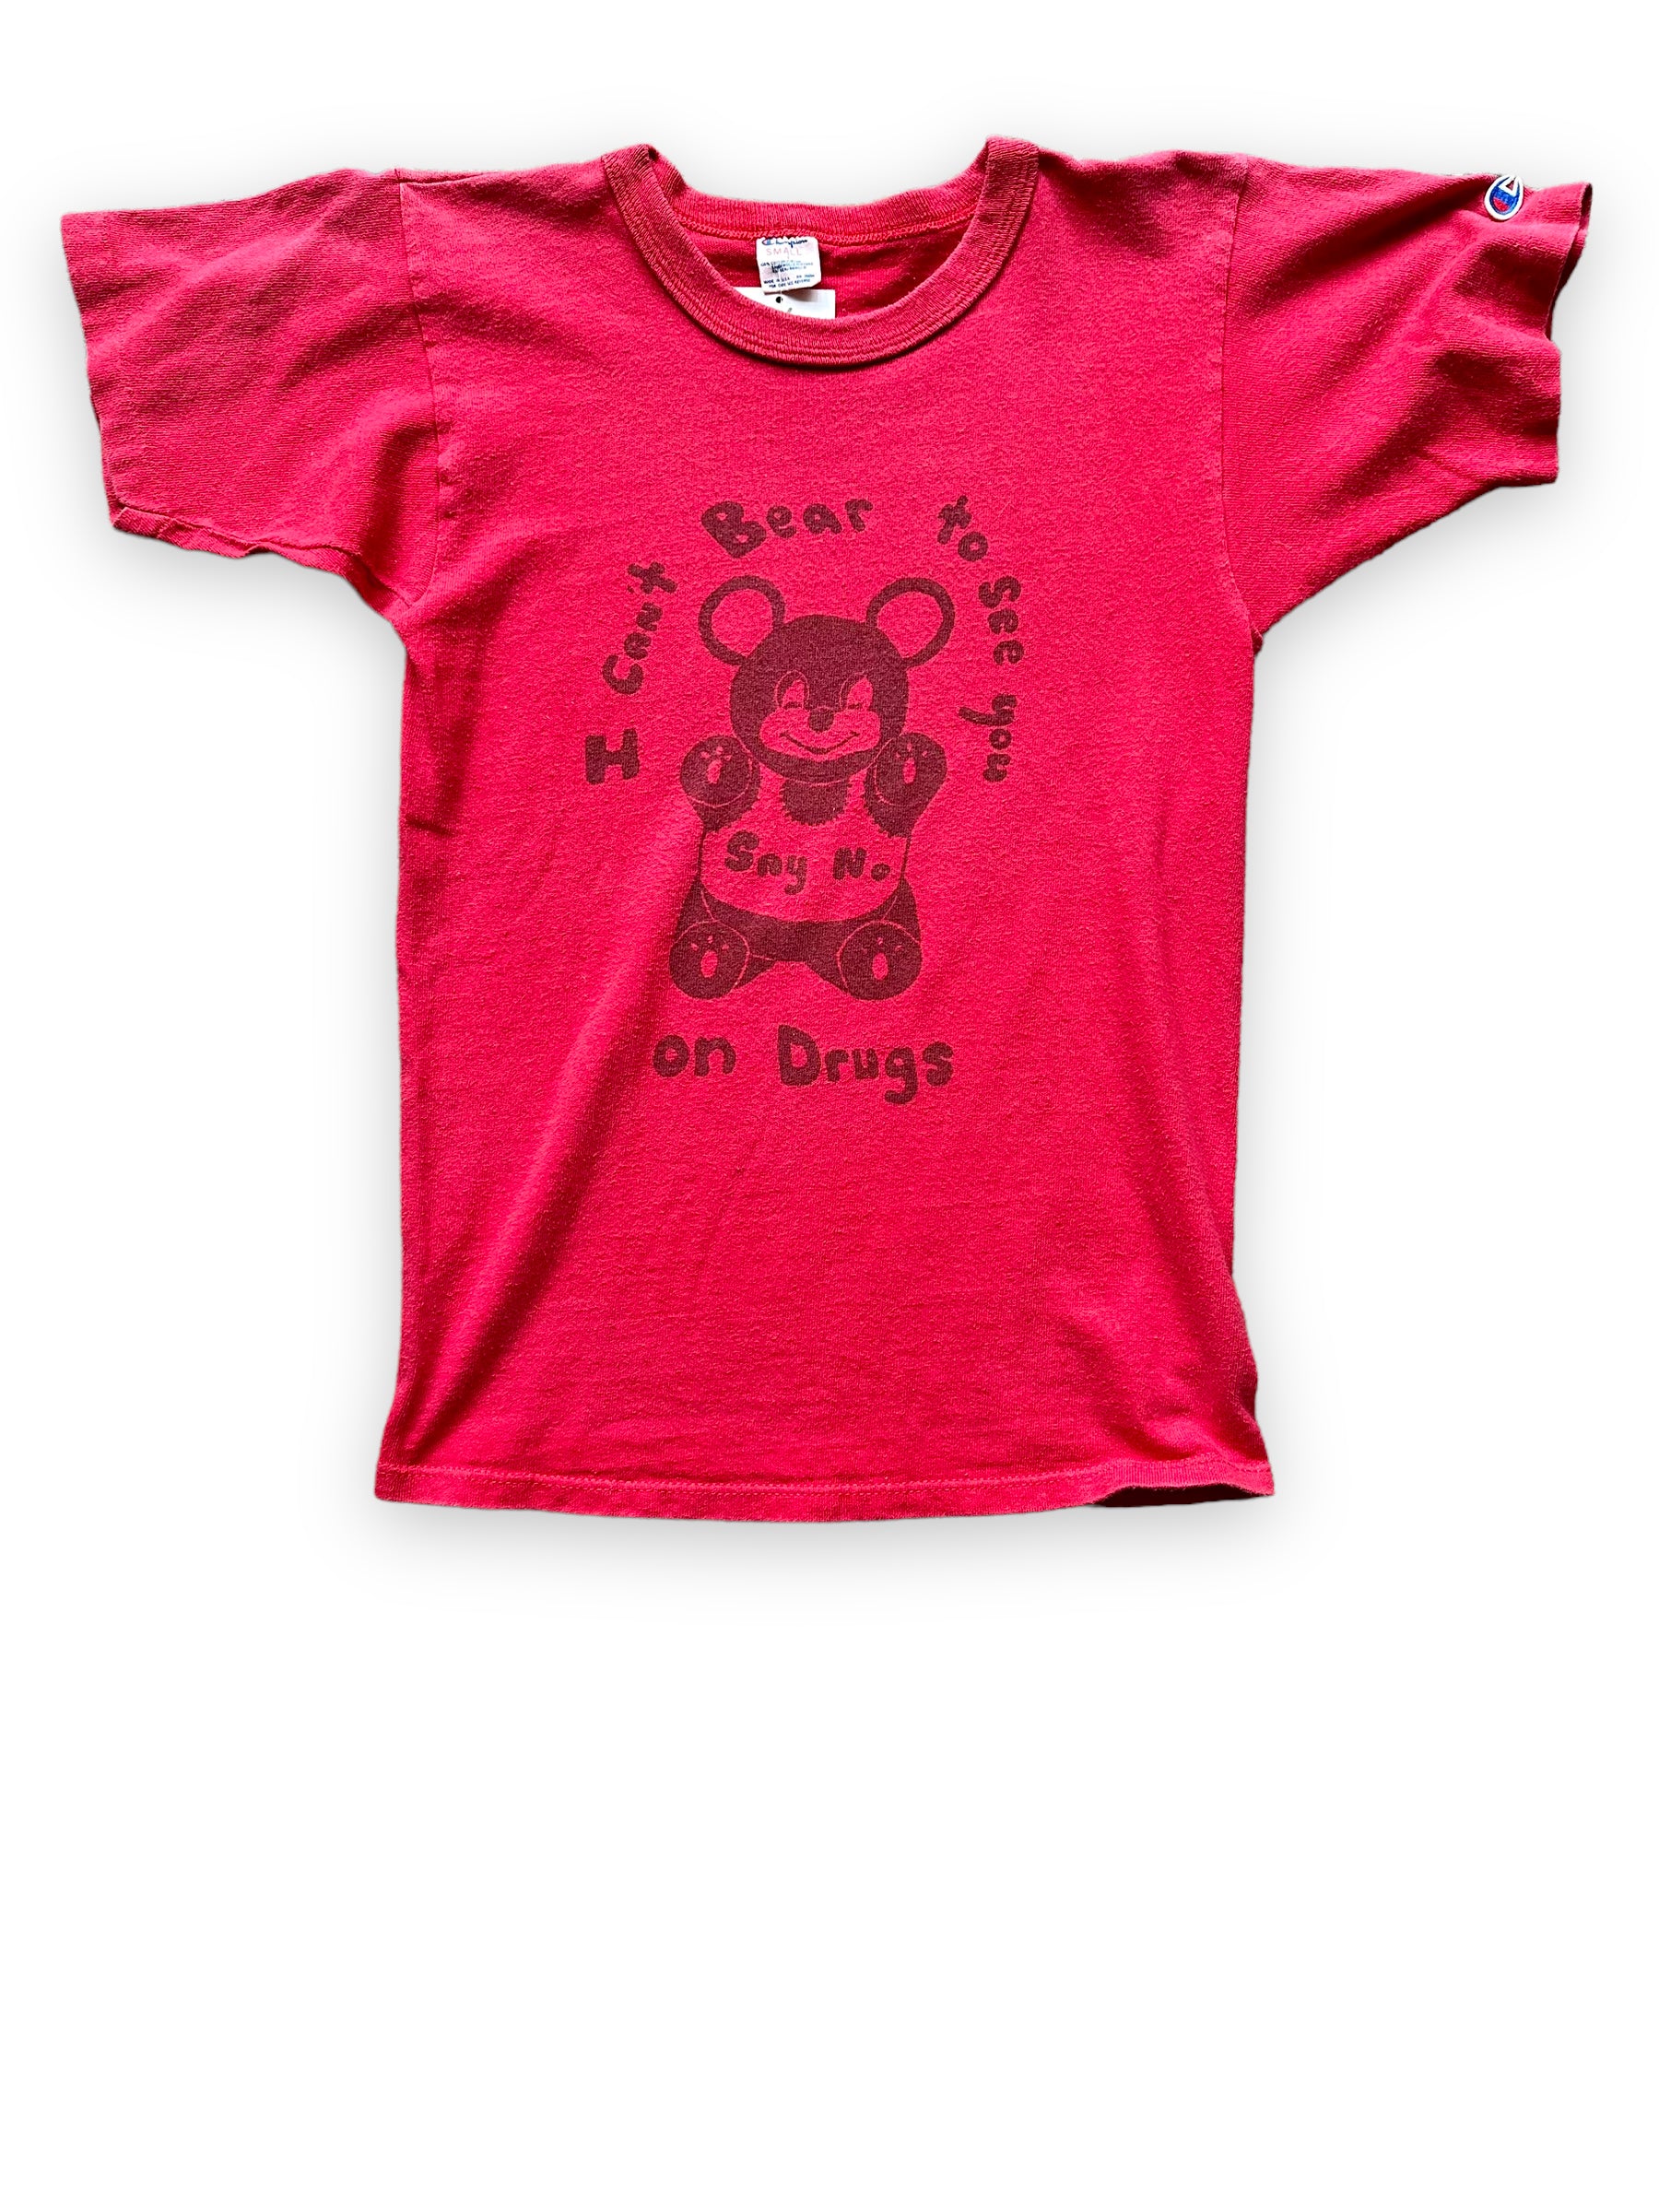 Front View of Vintage I Can't Bear To See You On Drugs Graphic Tee SZ S |  Vintage Champion Tee Seattle | Barn Owl Vintage